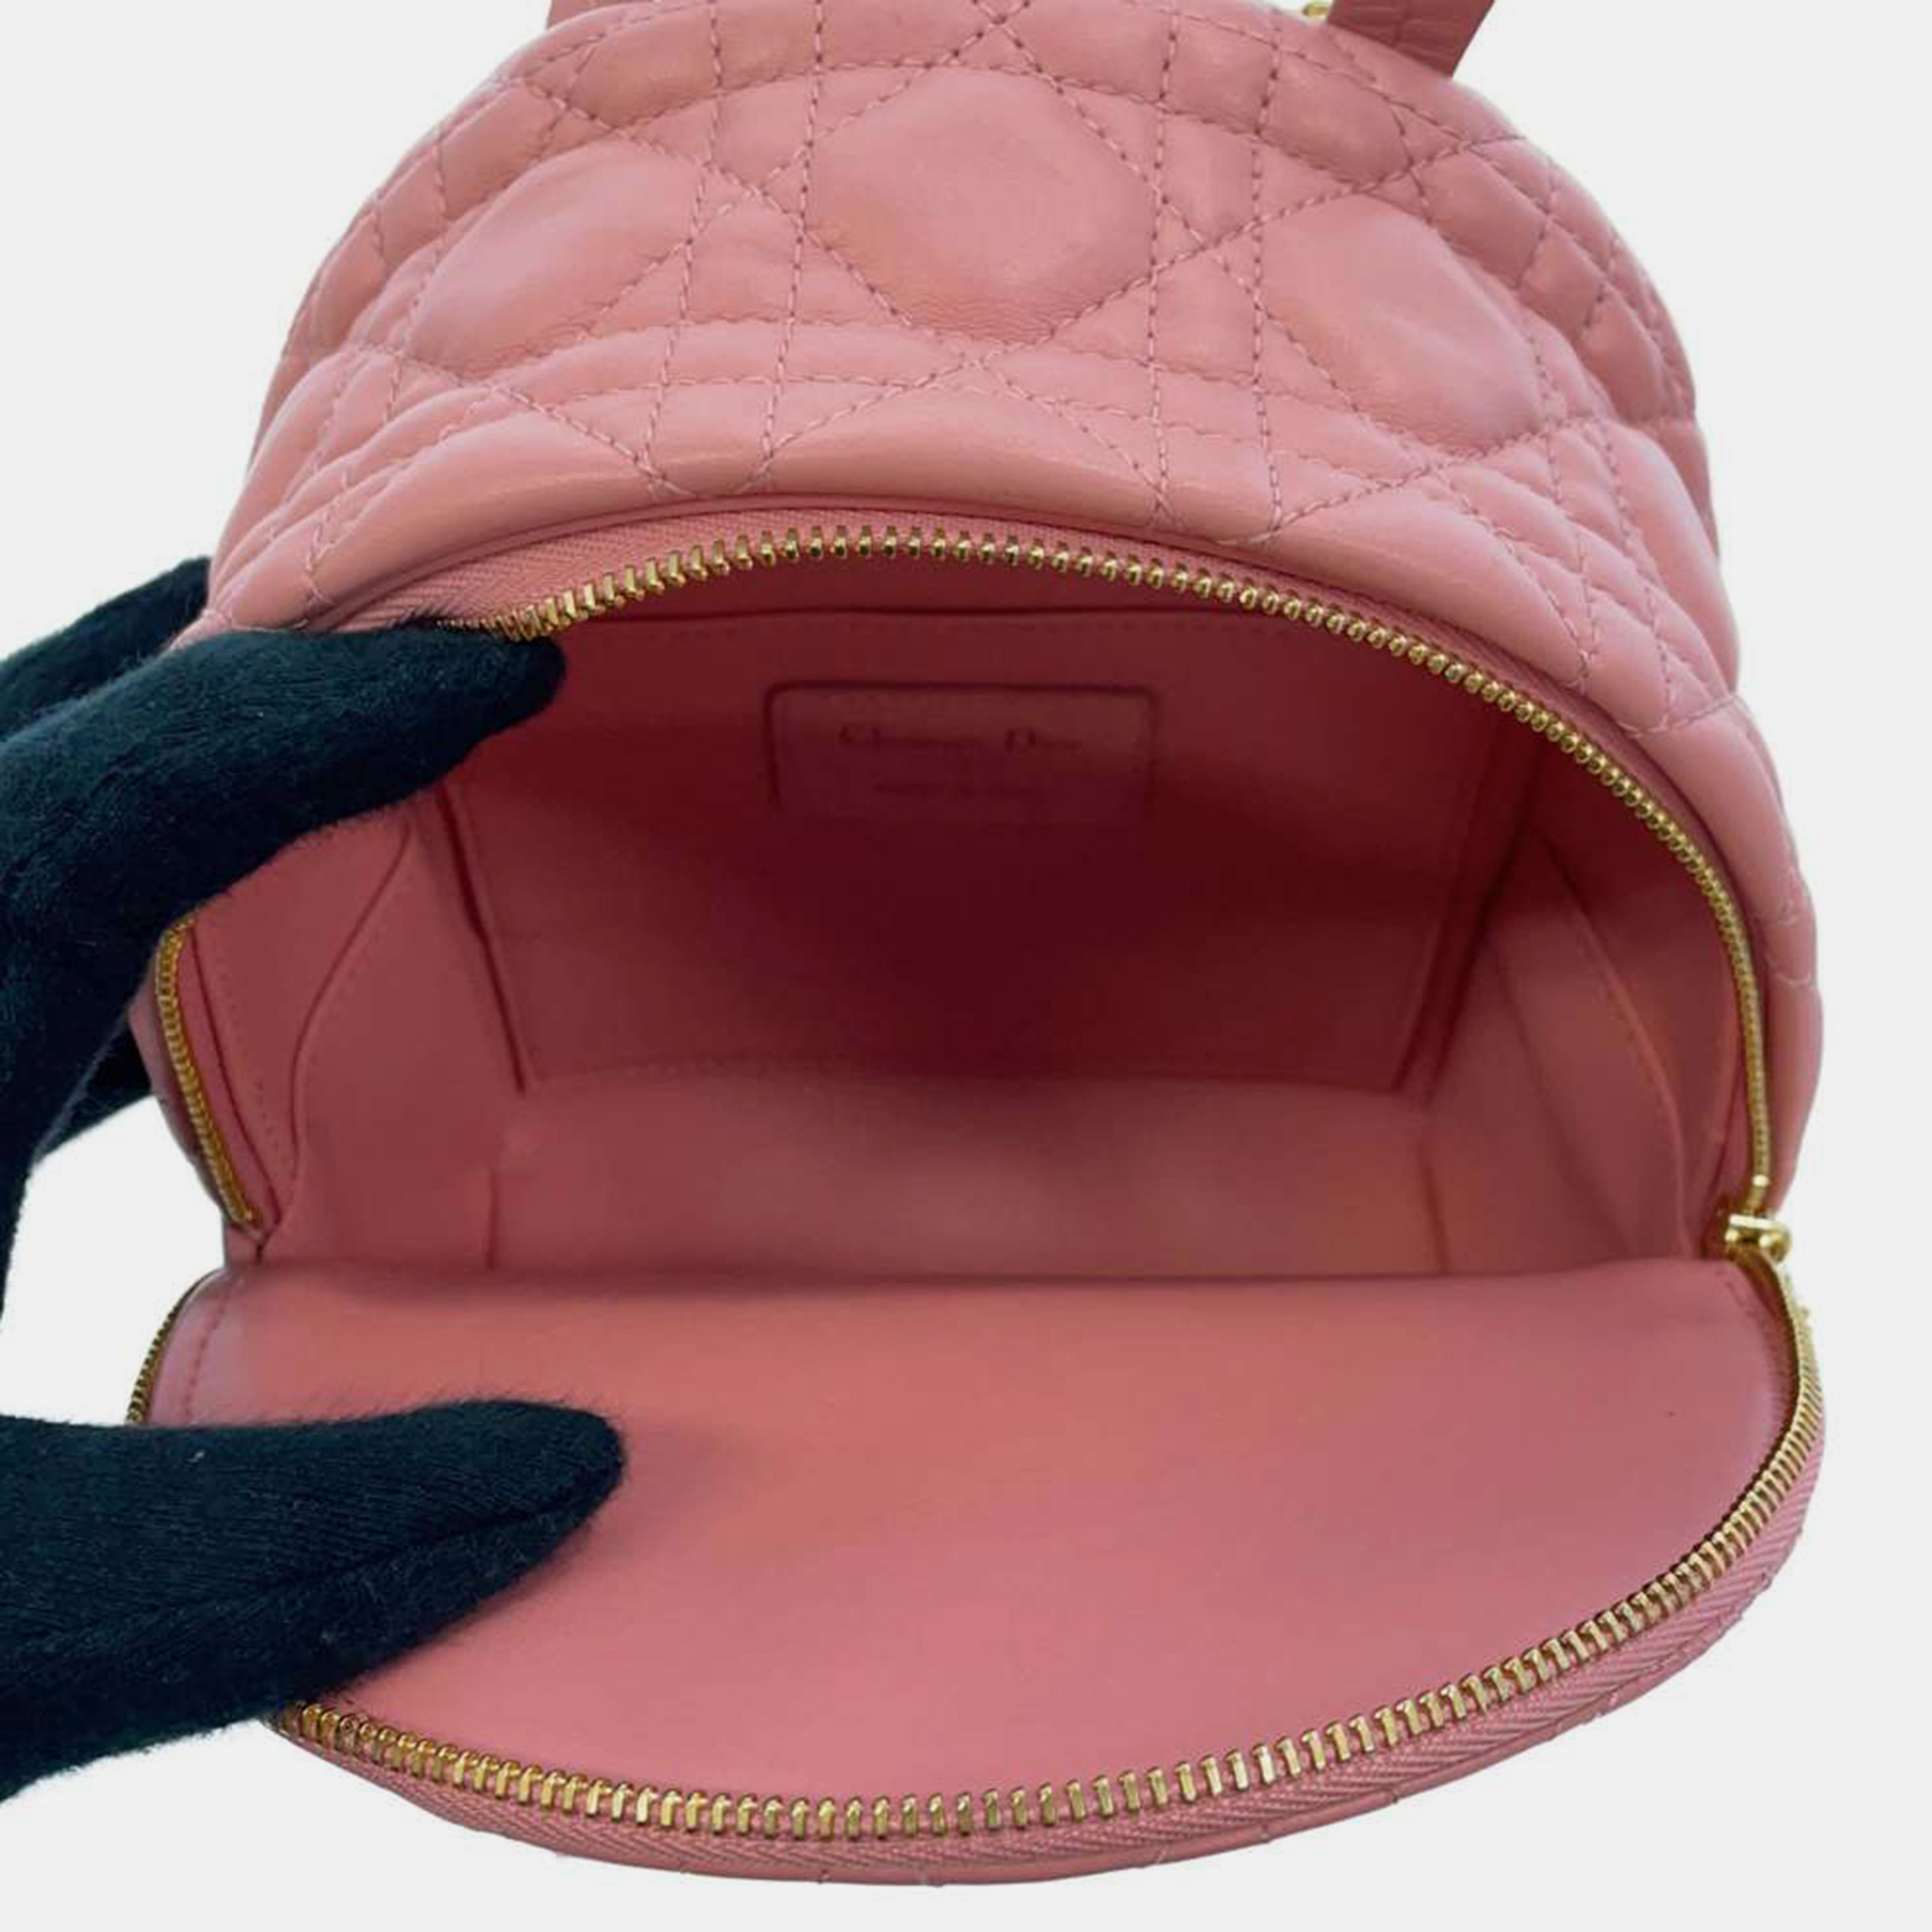 Dior Pink Cannage Leather Mini Dioramour Backpack